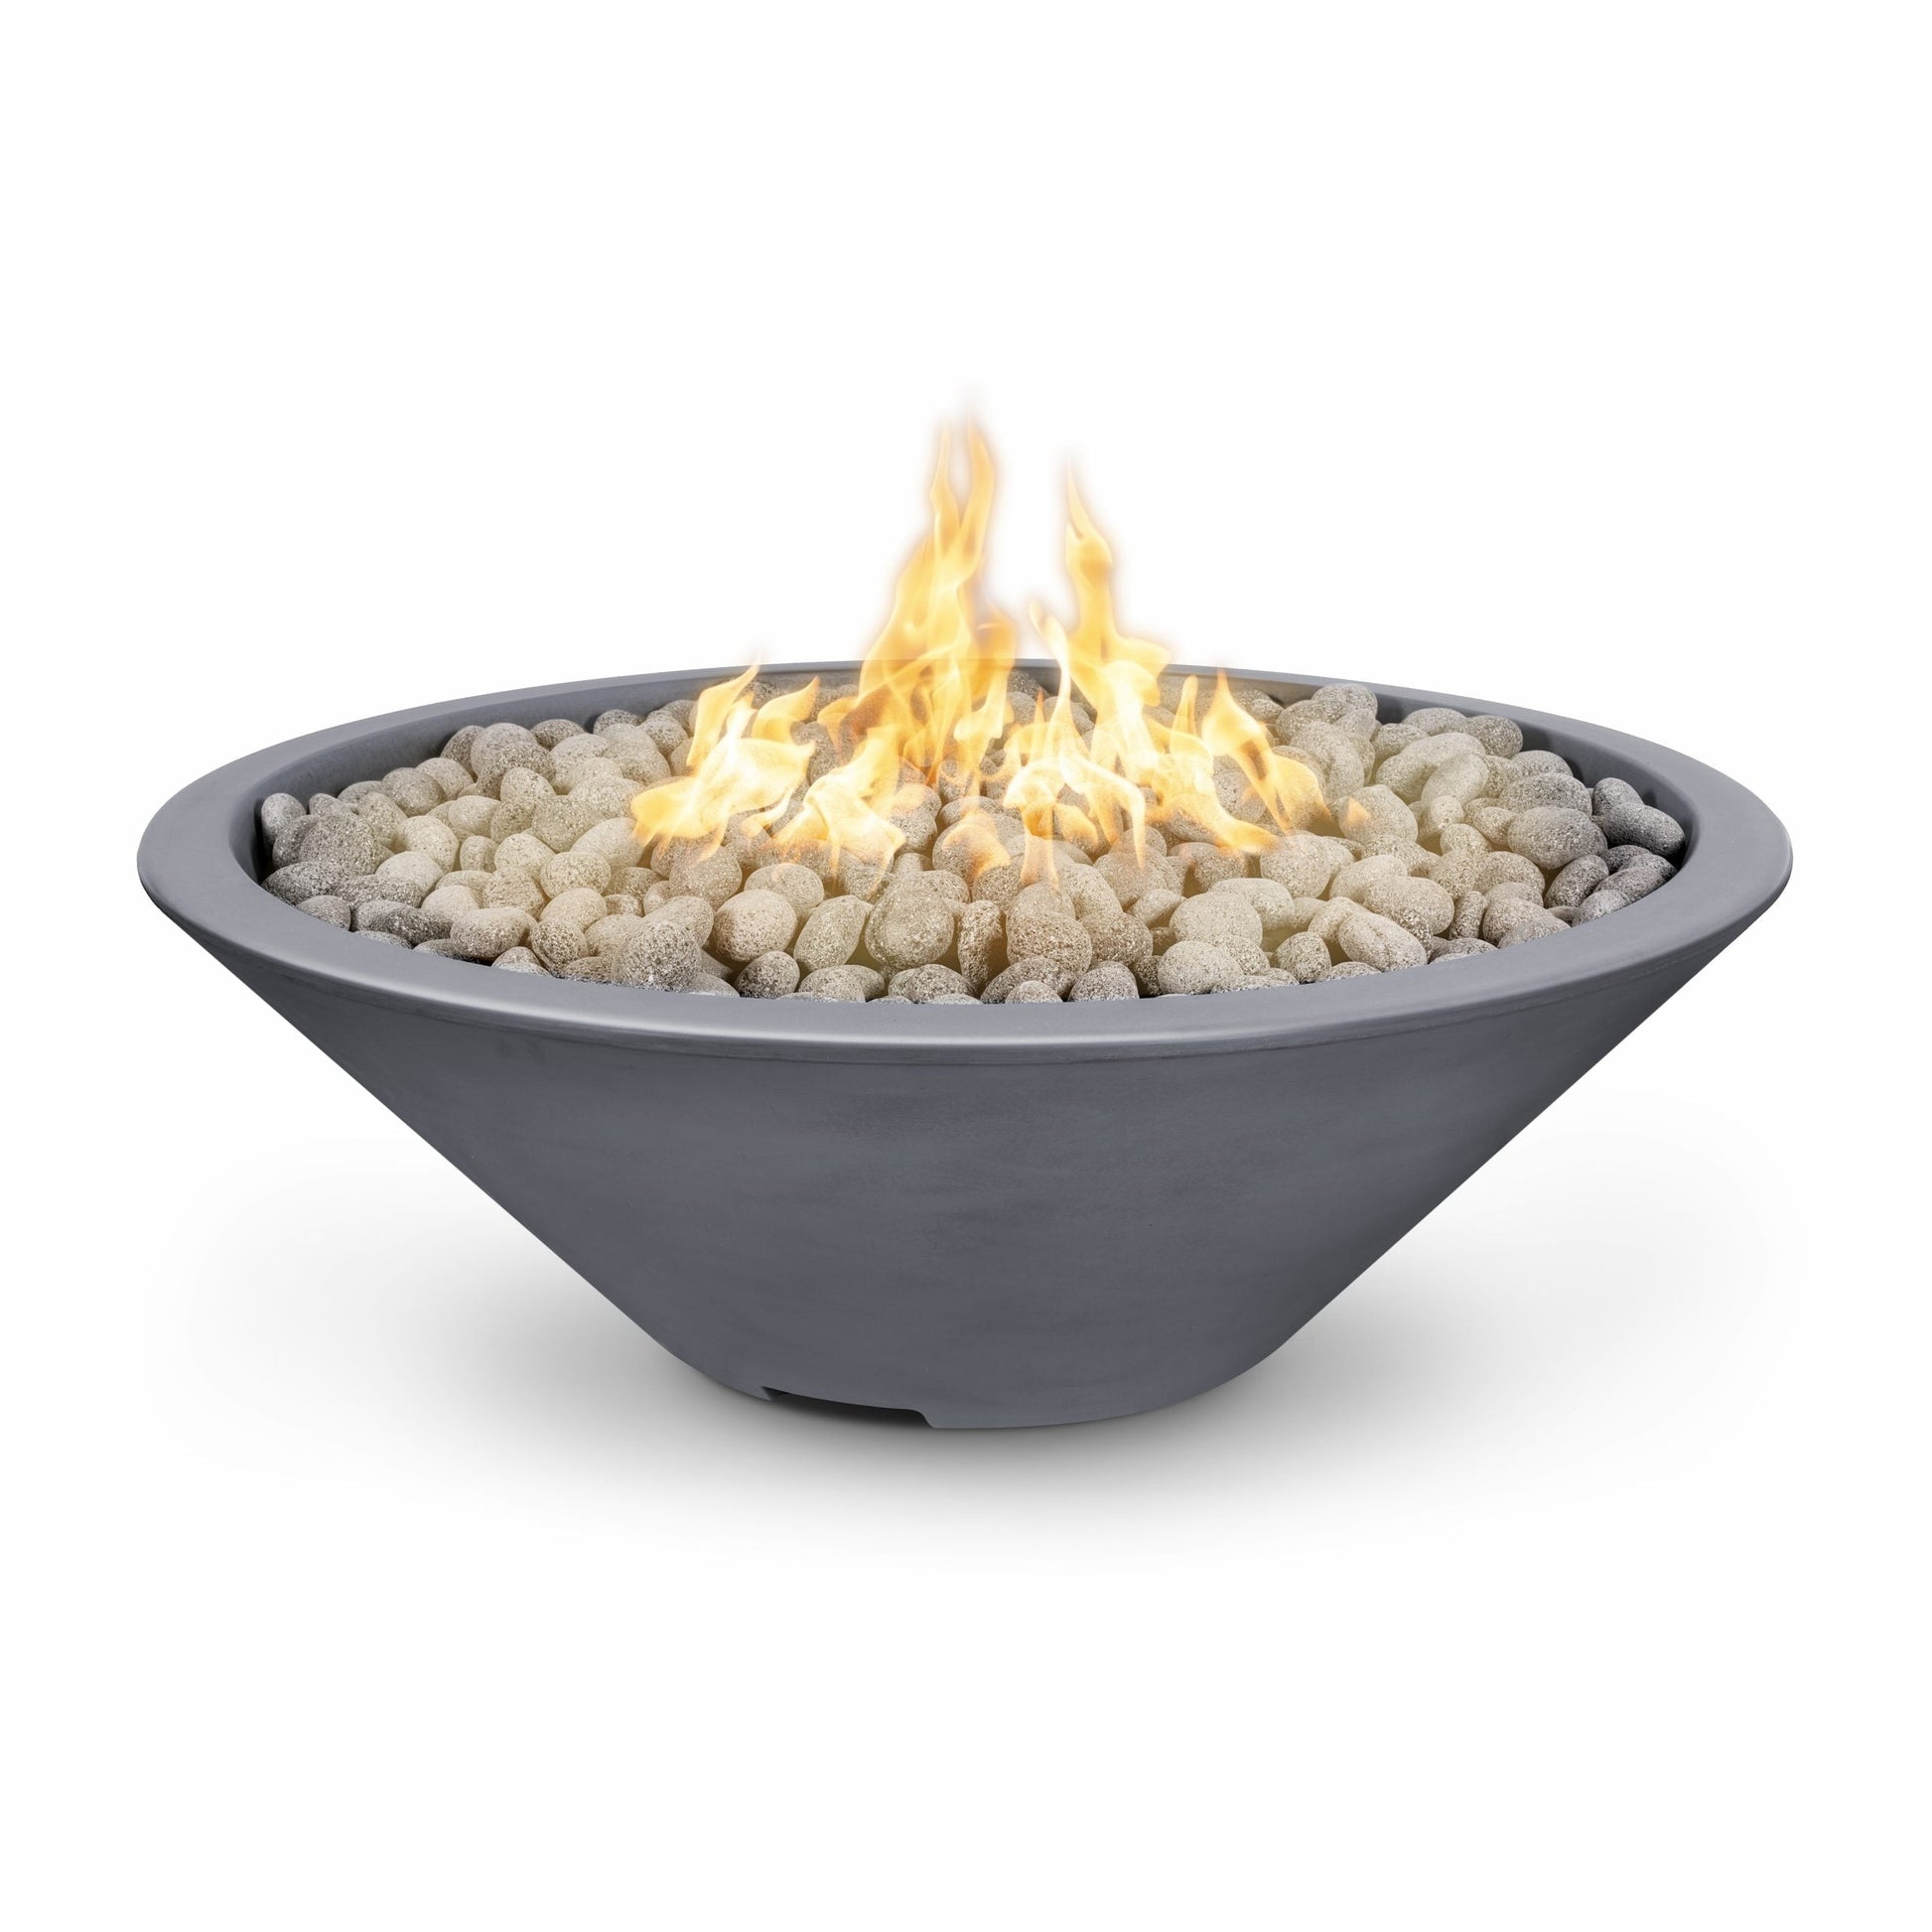 The Outdoor Plus Round Cazo 48" Pewter Powder Coated Metal Liquid Propane Fire Pit with Flame Sense with Spark Ignition